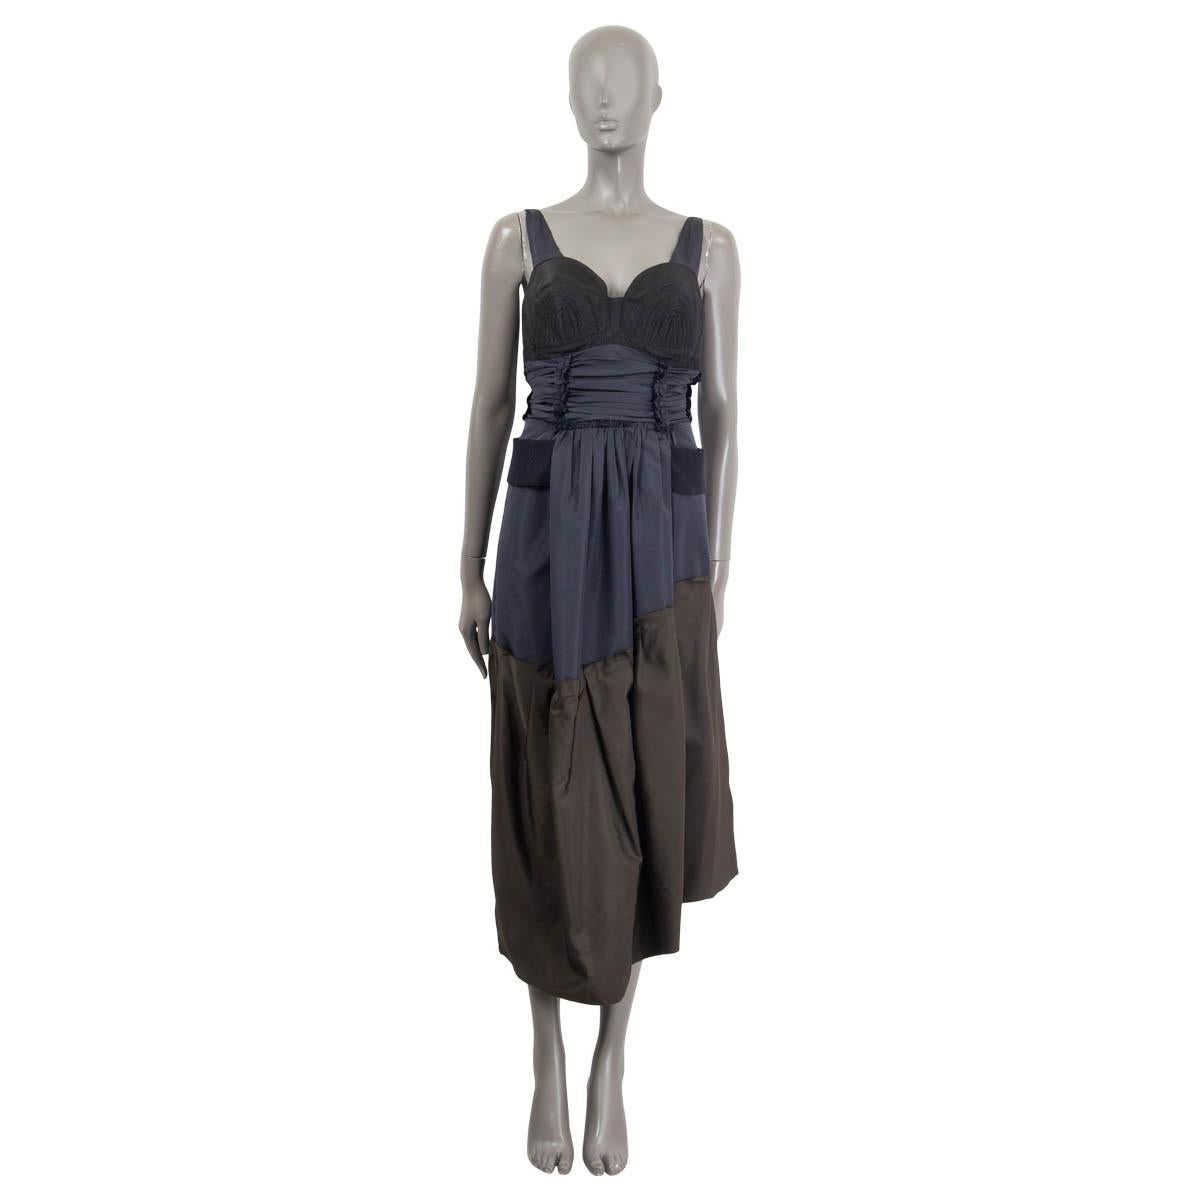 100% authentic Prada gathered bustier dress in khaki green, navy blue and black silk (56%) and  polyester (44%). Embellished with embroidery on the breast. Comes with belt in navy blue virgin wool (100%). Opens with a concealed zipper and a hook on